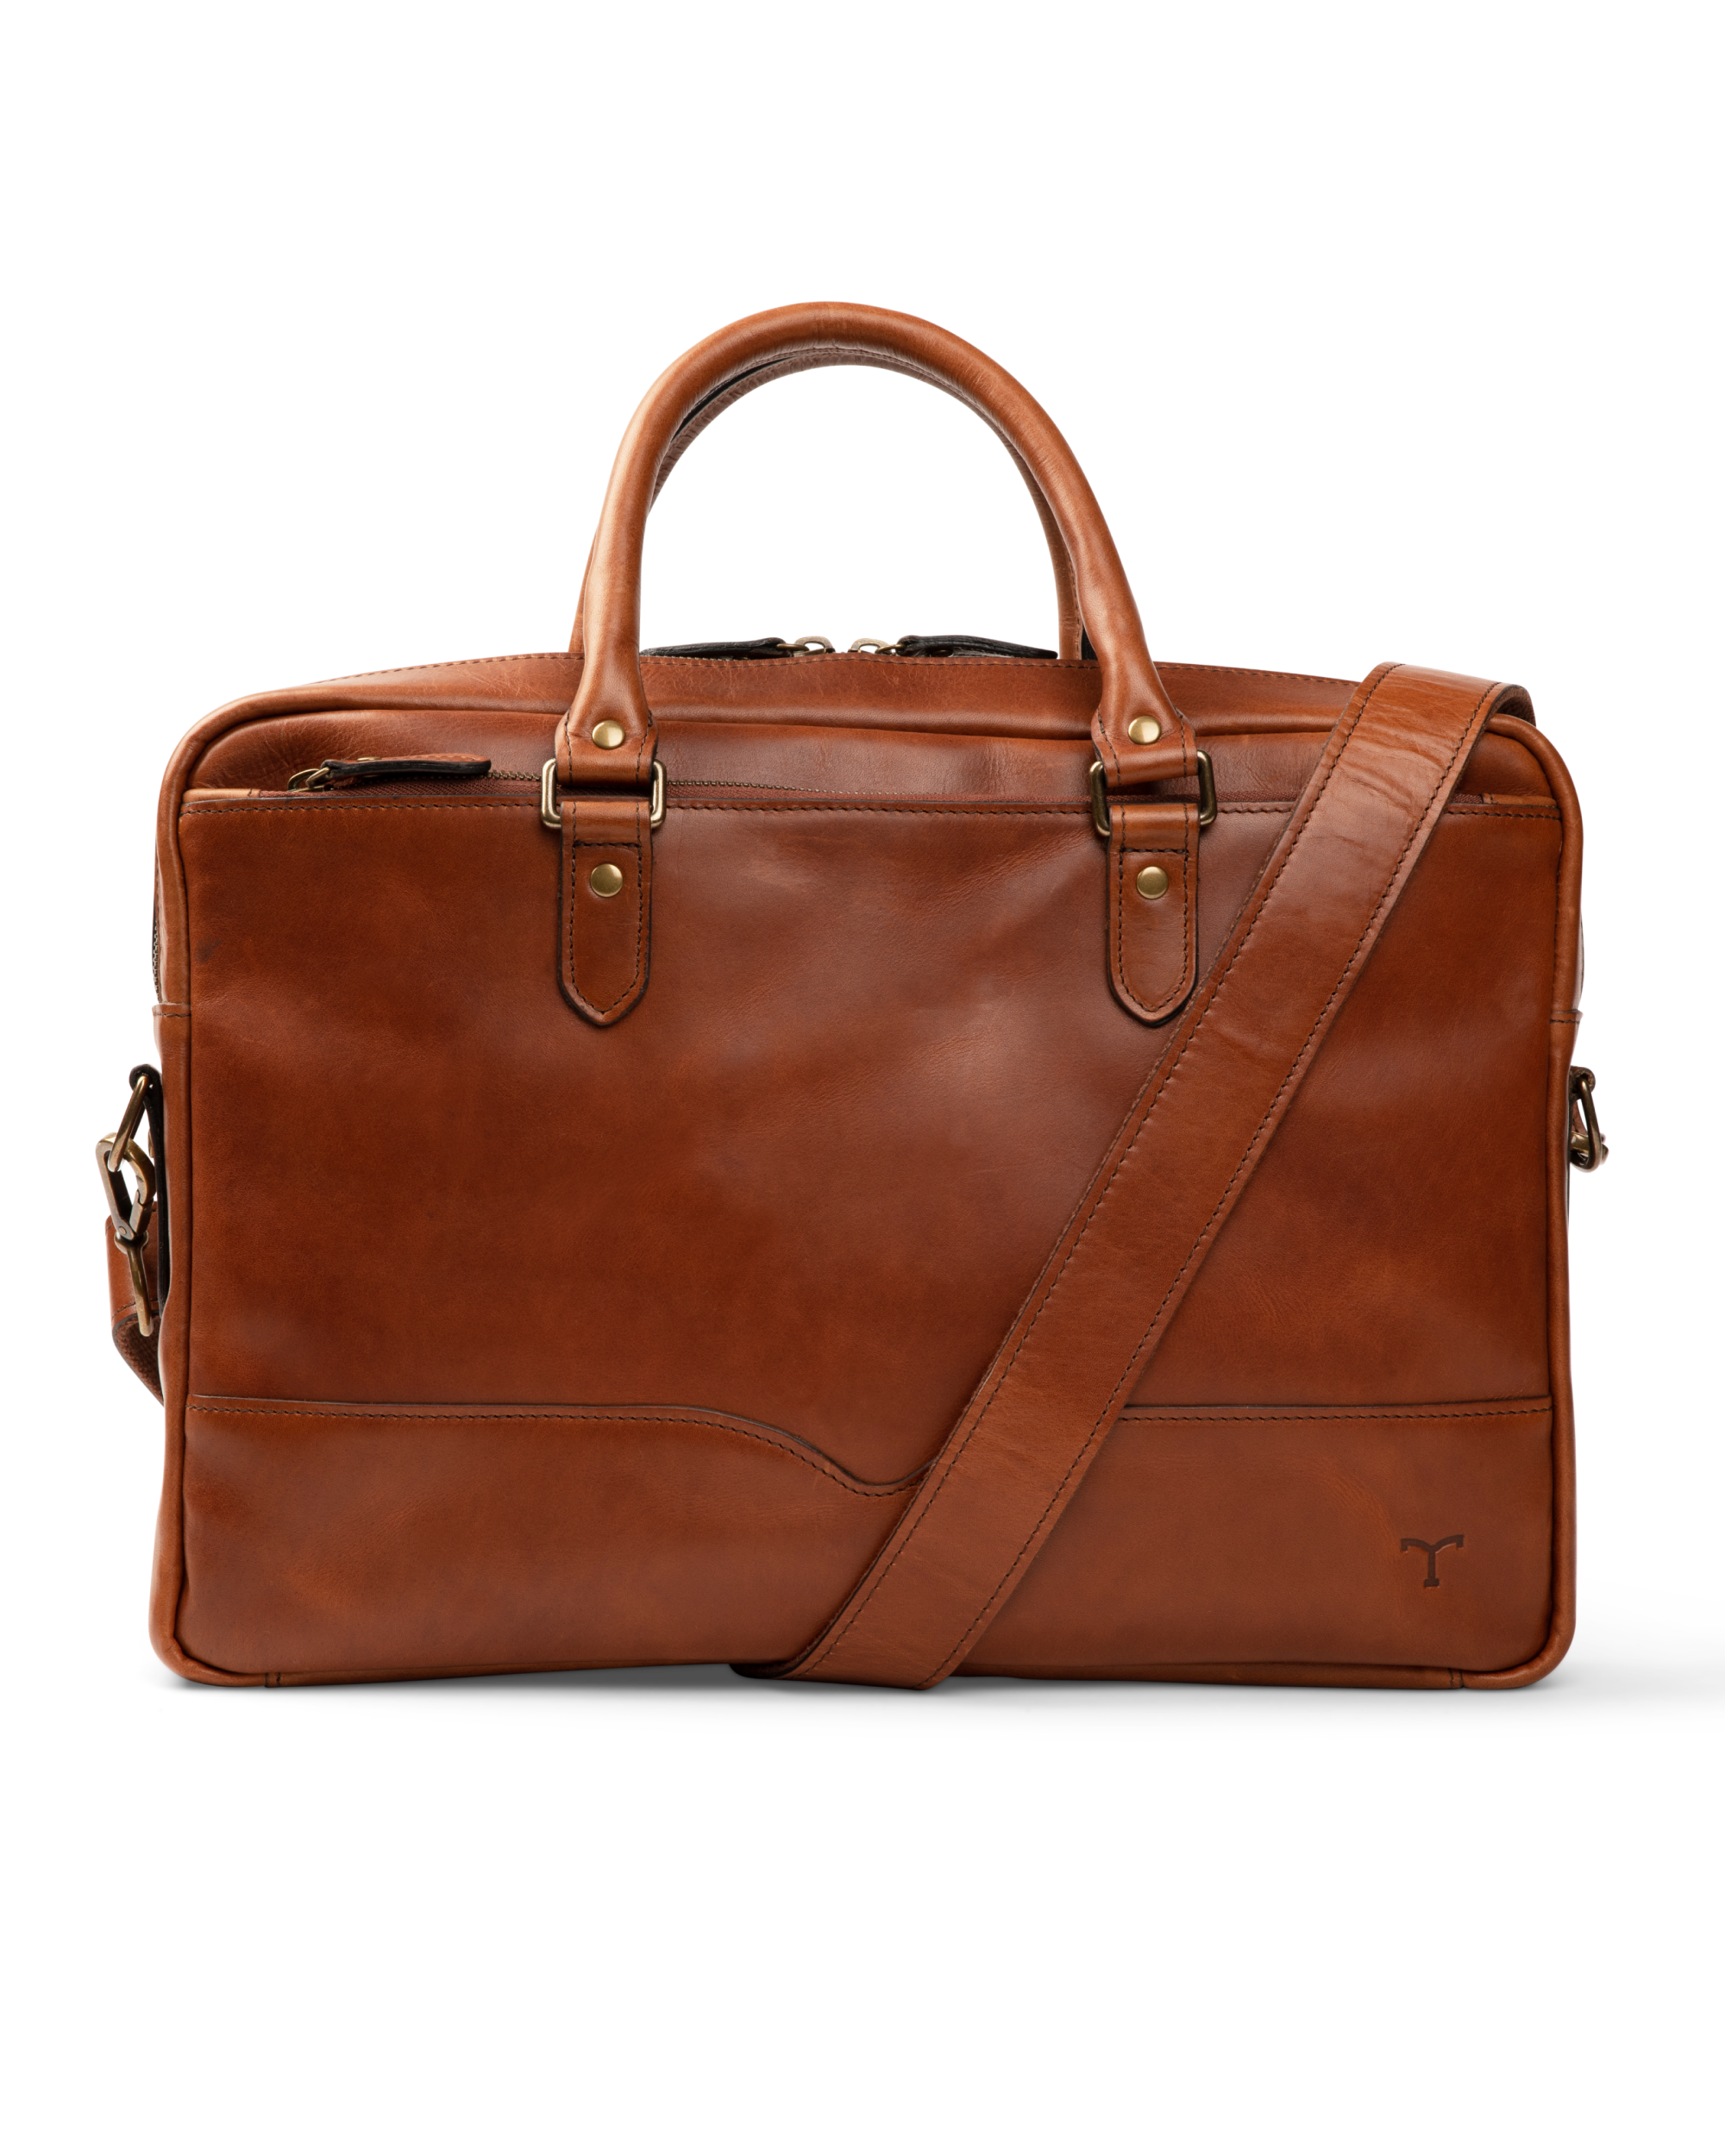 Best Bags To Wear With a Suit To Look Smart & Professional - Von Baer